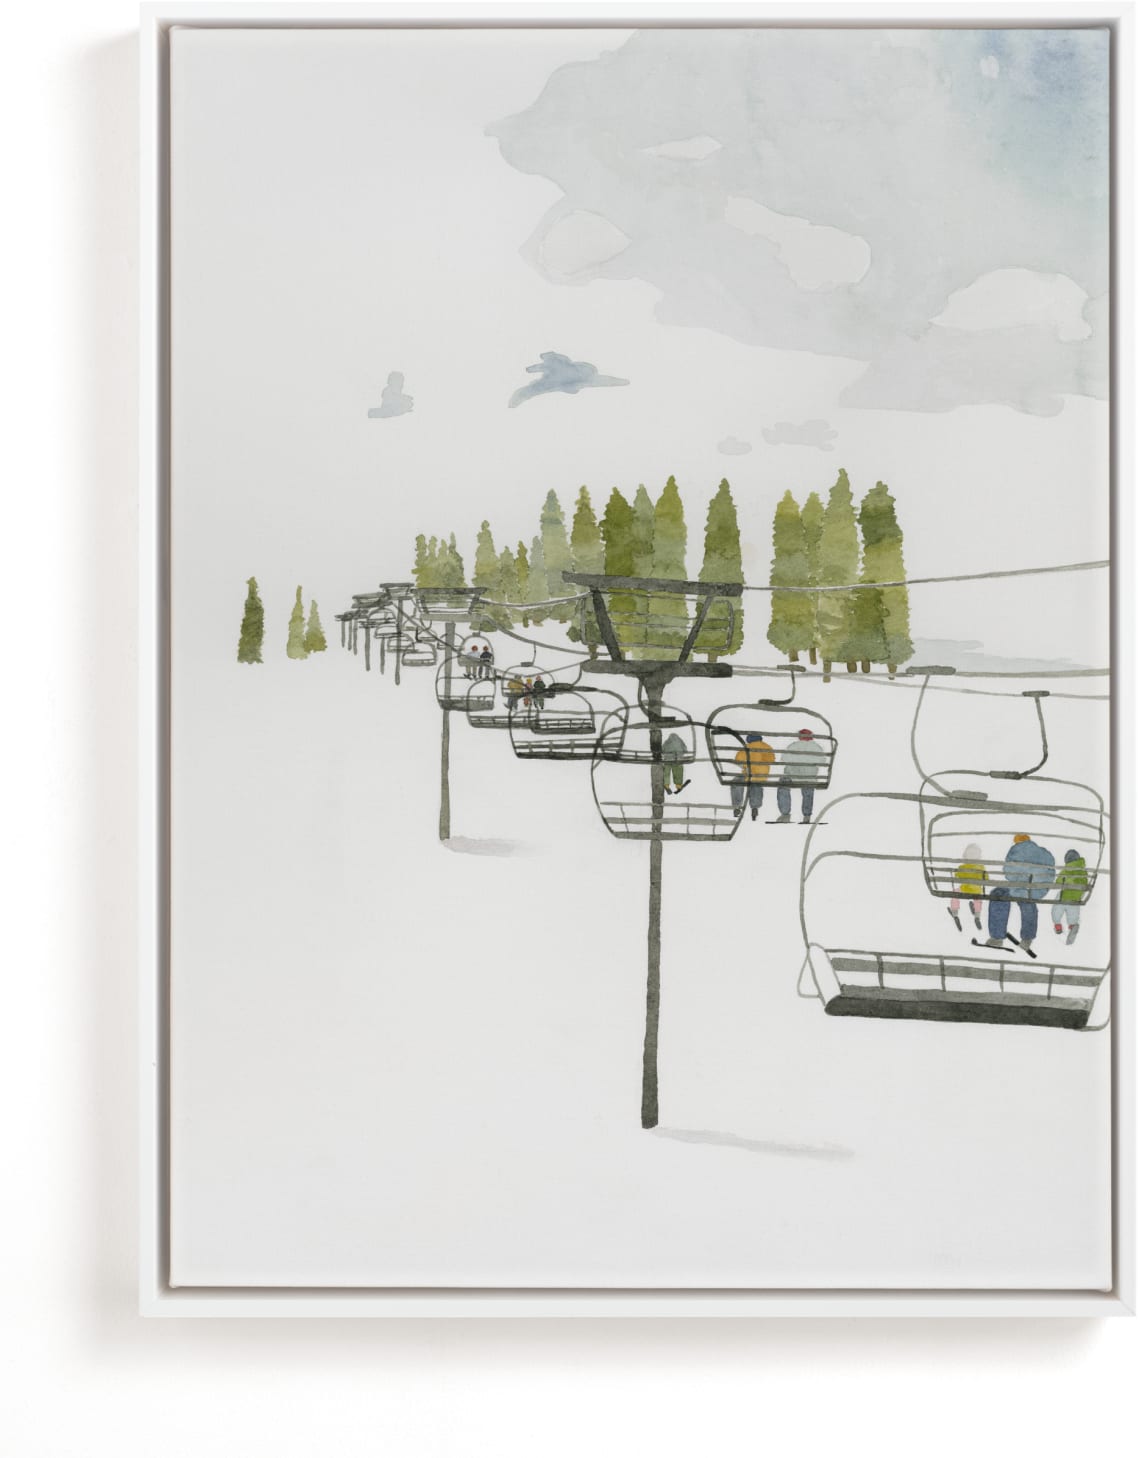 This is a white art by Monica Loos called Ski Lift.